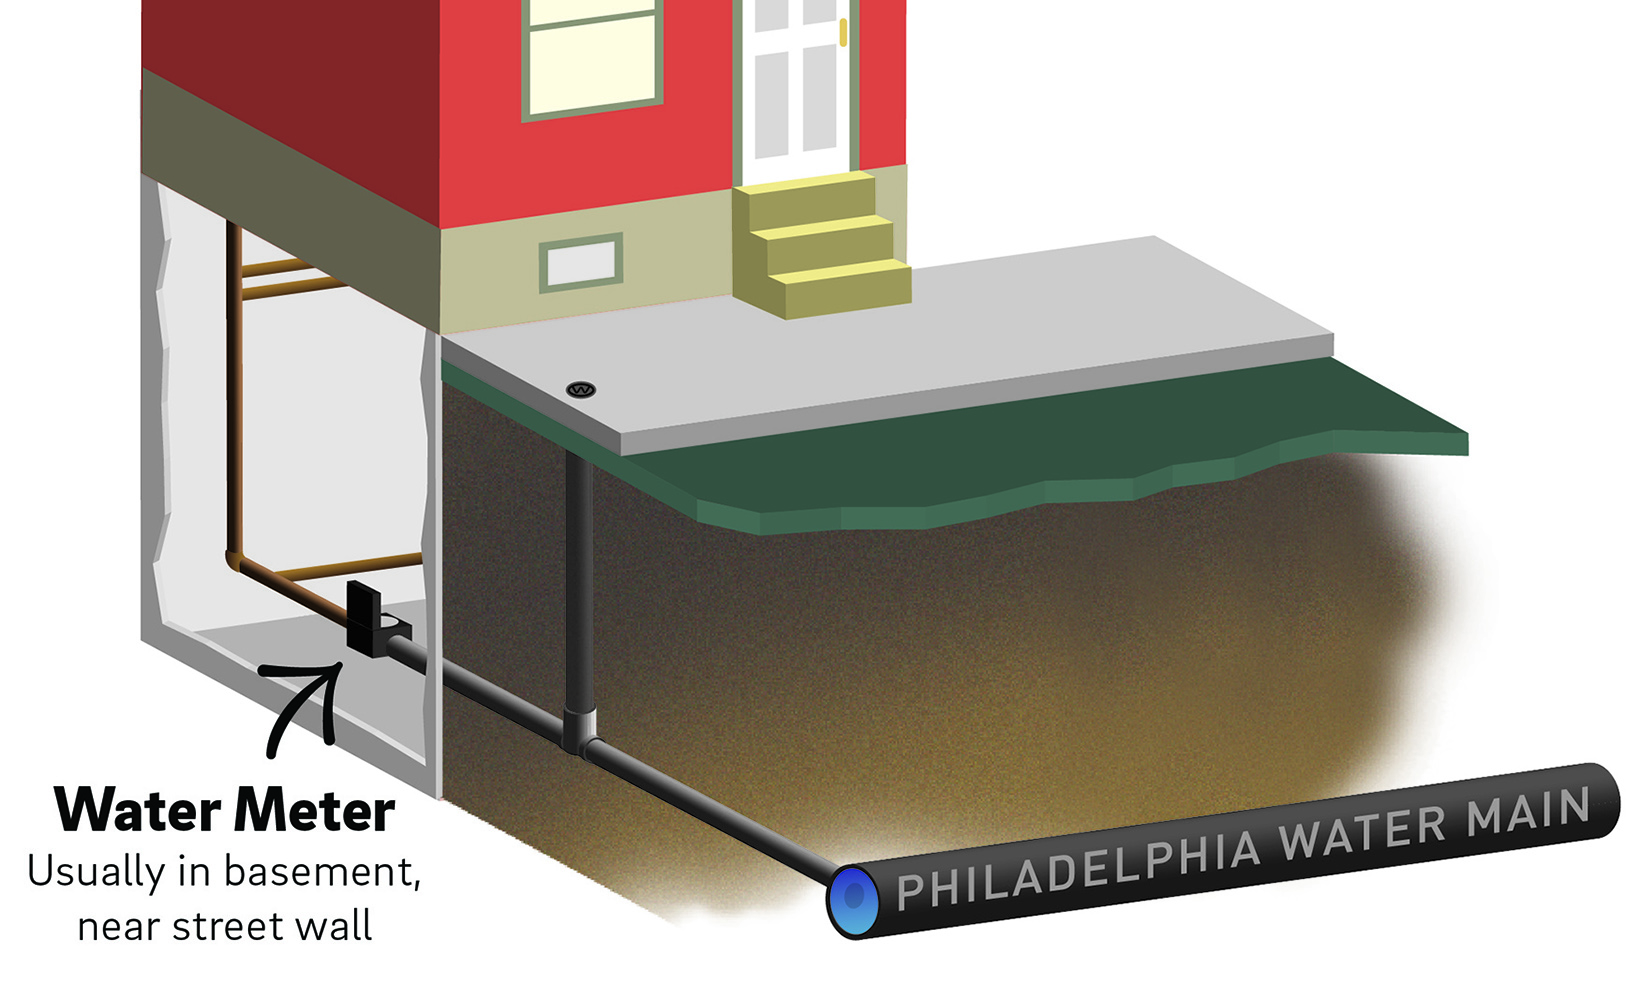 3d cut-away style simple illustration of the typical plumbing leading from a water main into a Philadelphia home. The water meter is usually located in the basement, near the front wall (closest to the street)